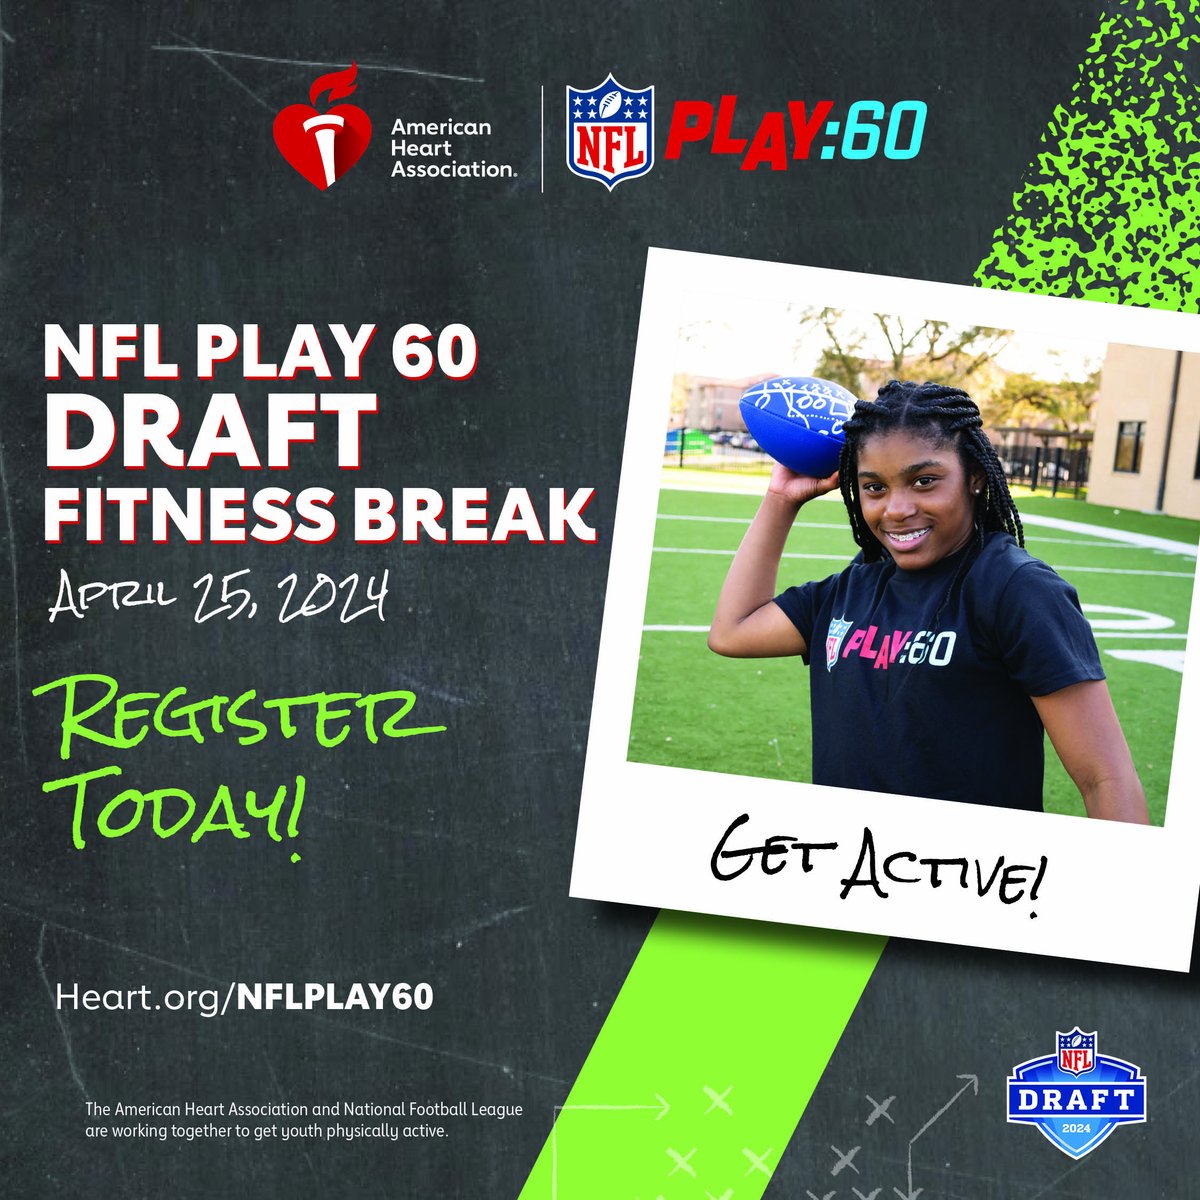 Educators! We’re teaming up with the @NFL for a FREE NFL PLAY 60 Draft Fitness Break featuring ways to move more w/ special guests. Register your students today at spr.ly/6013wcrU3 #PLAY60 🏈💪